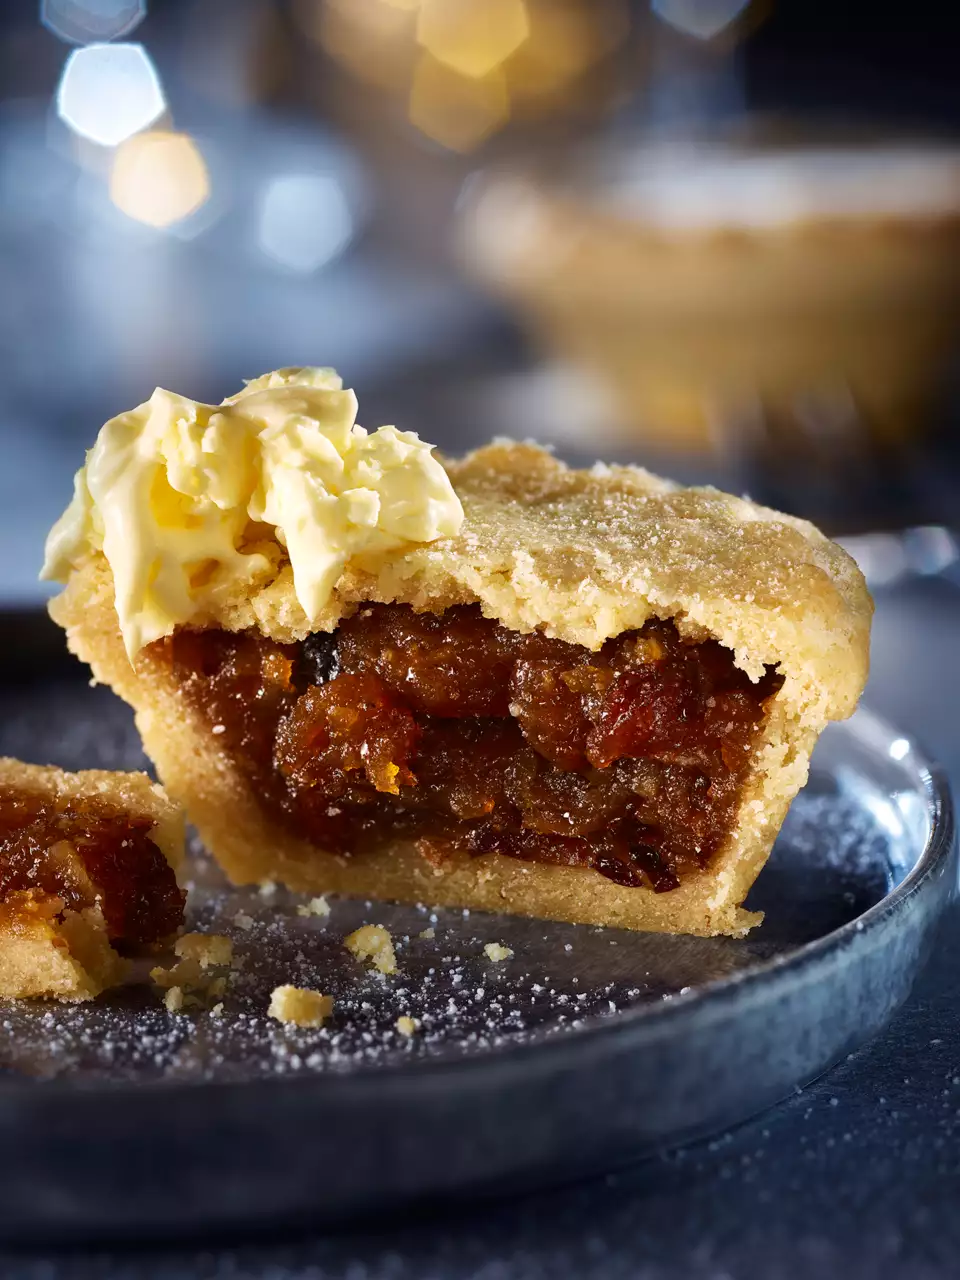 Extra Special Brown Butter & Rum Mince Pies, £2.75/6pck